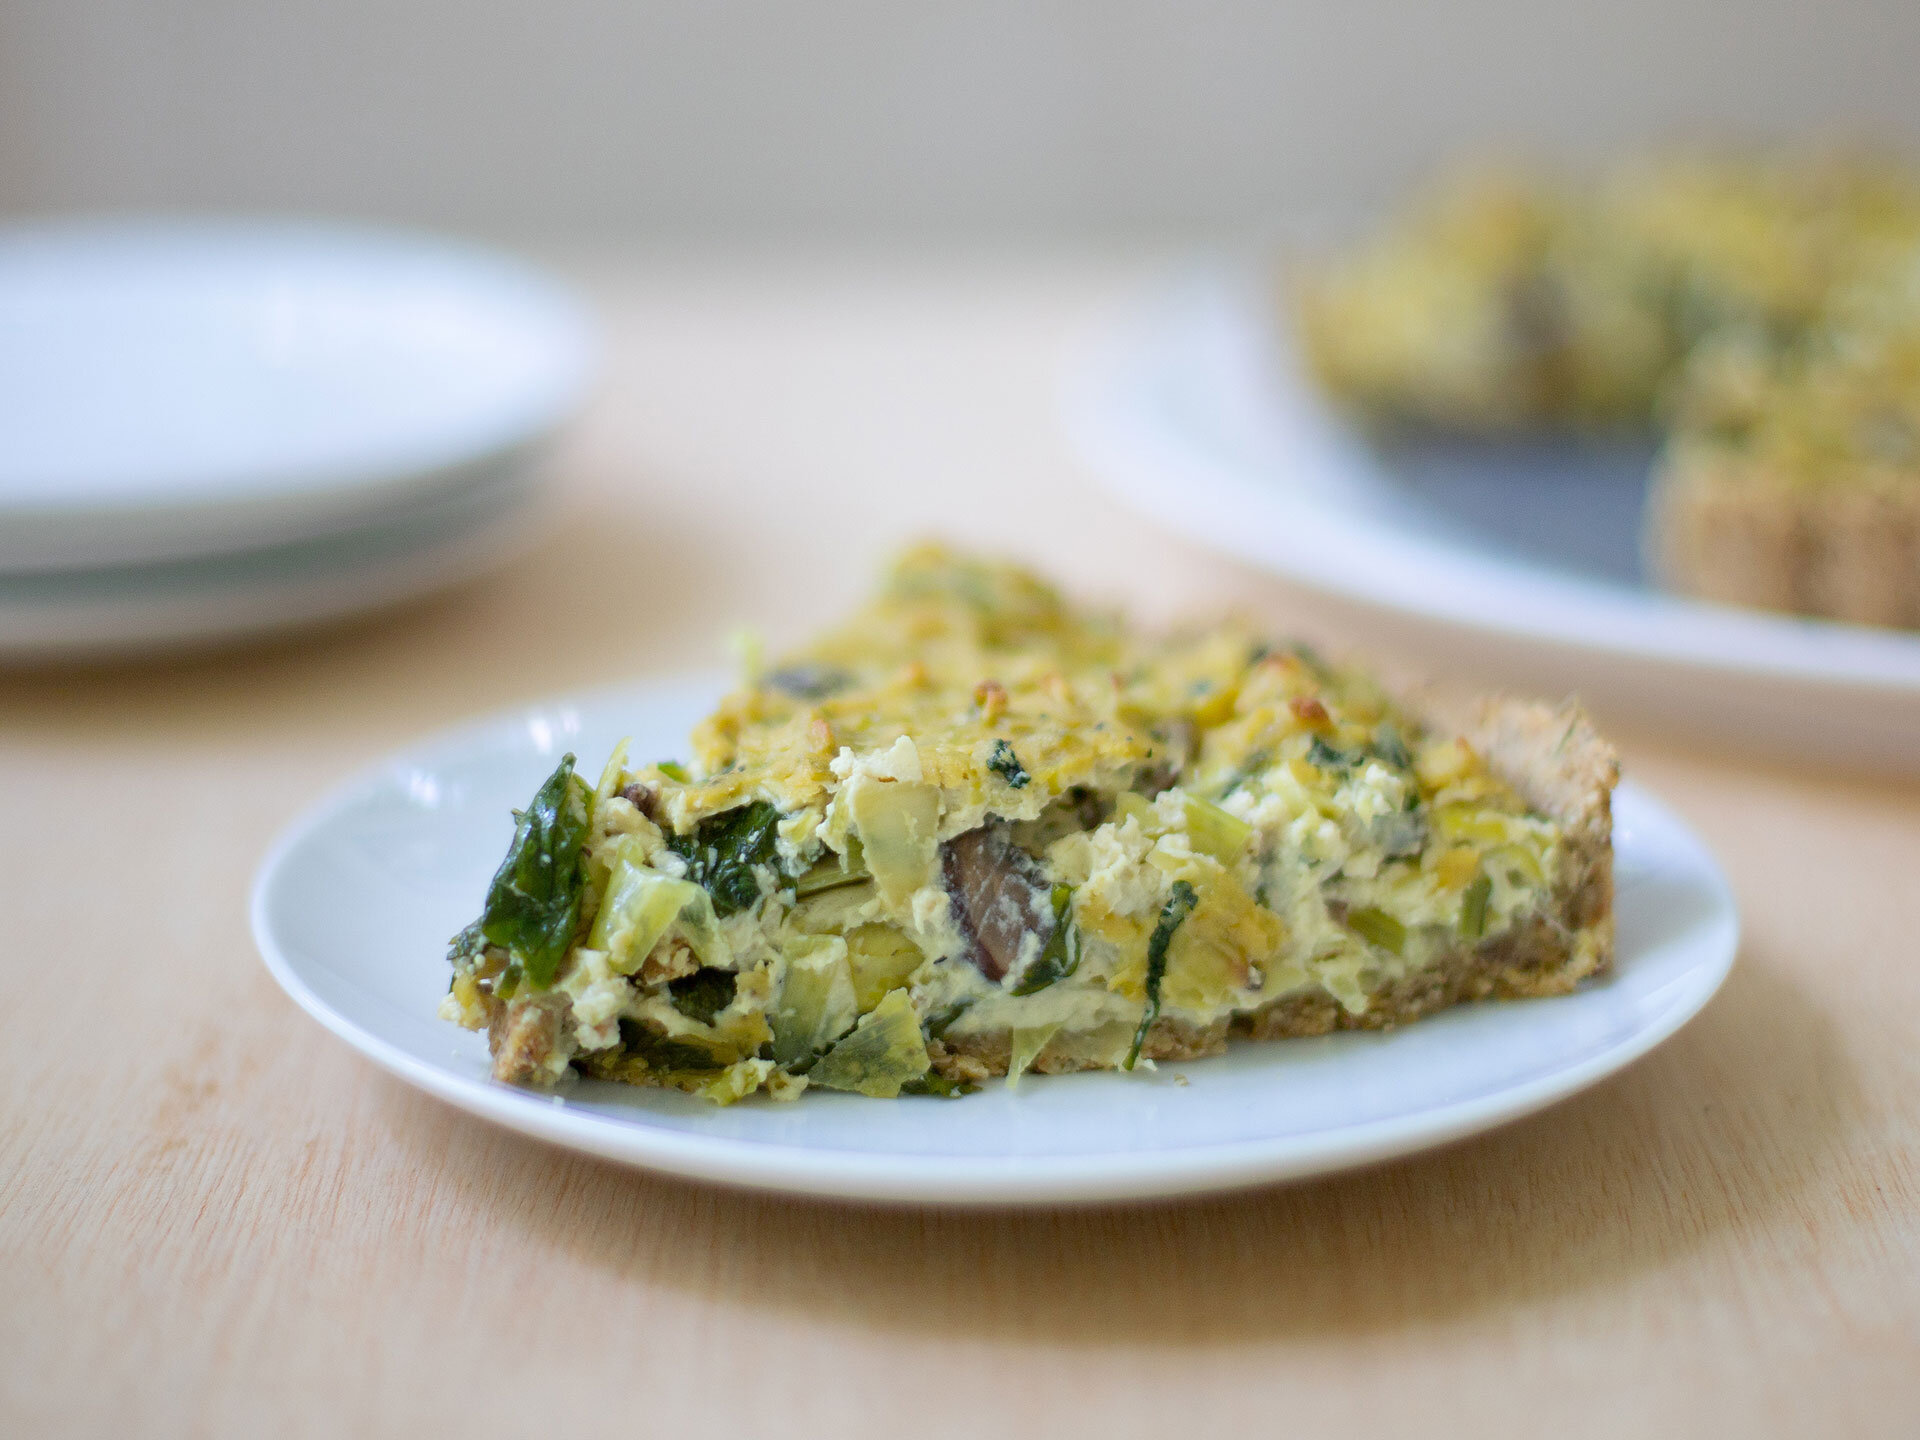 Turnip Greens Tofu Quiche with Mushroom and Olives